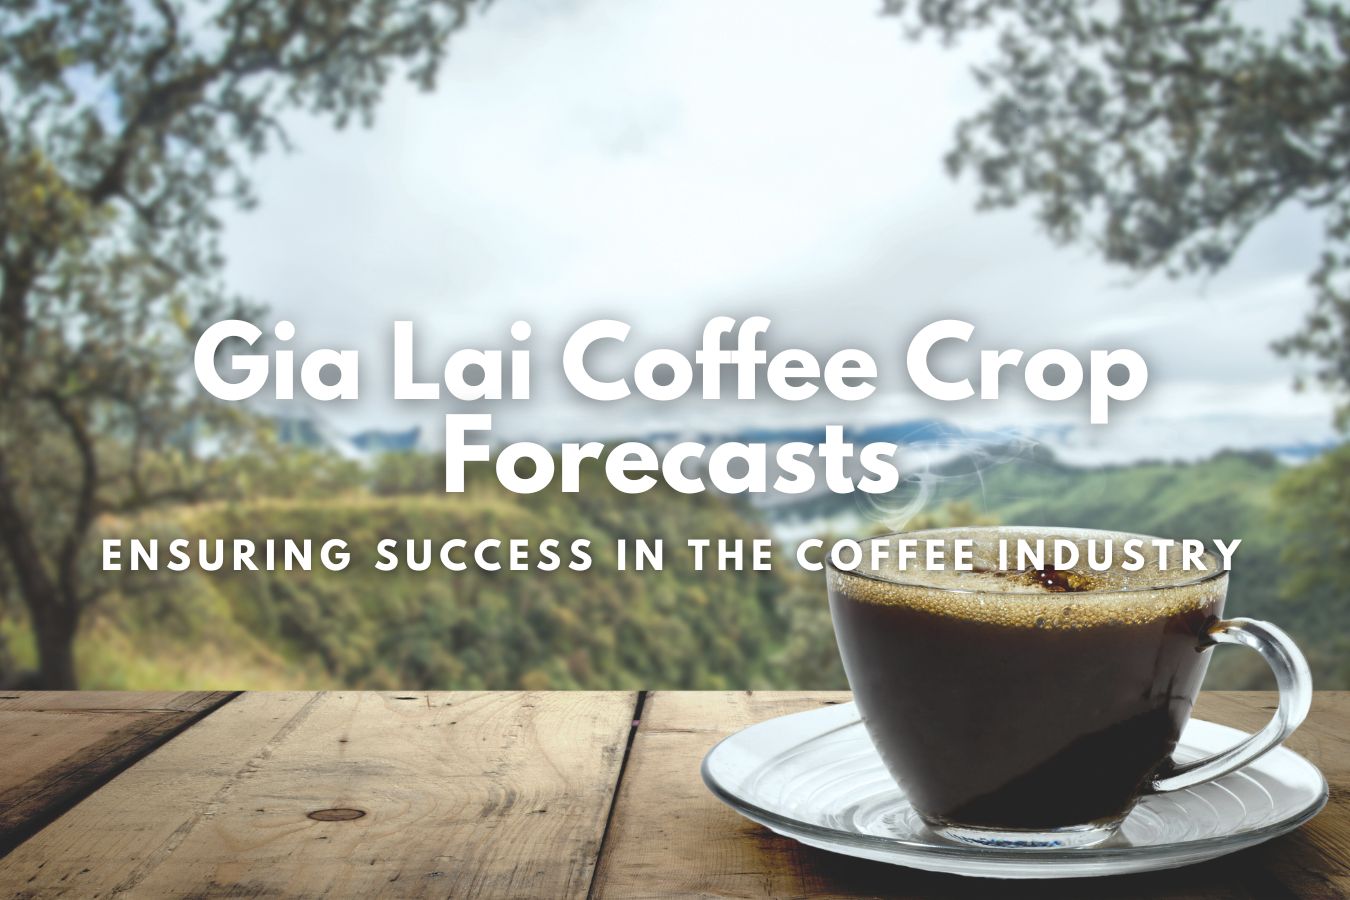 Gia Lai Coffee Crop Forecasts Ensuring Success in the Coffee Industry